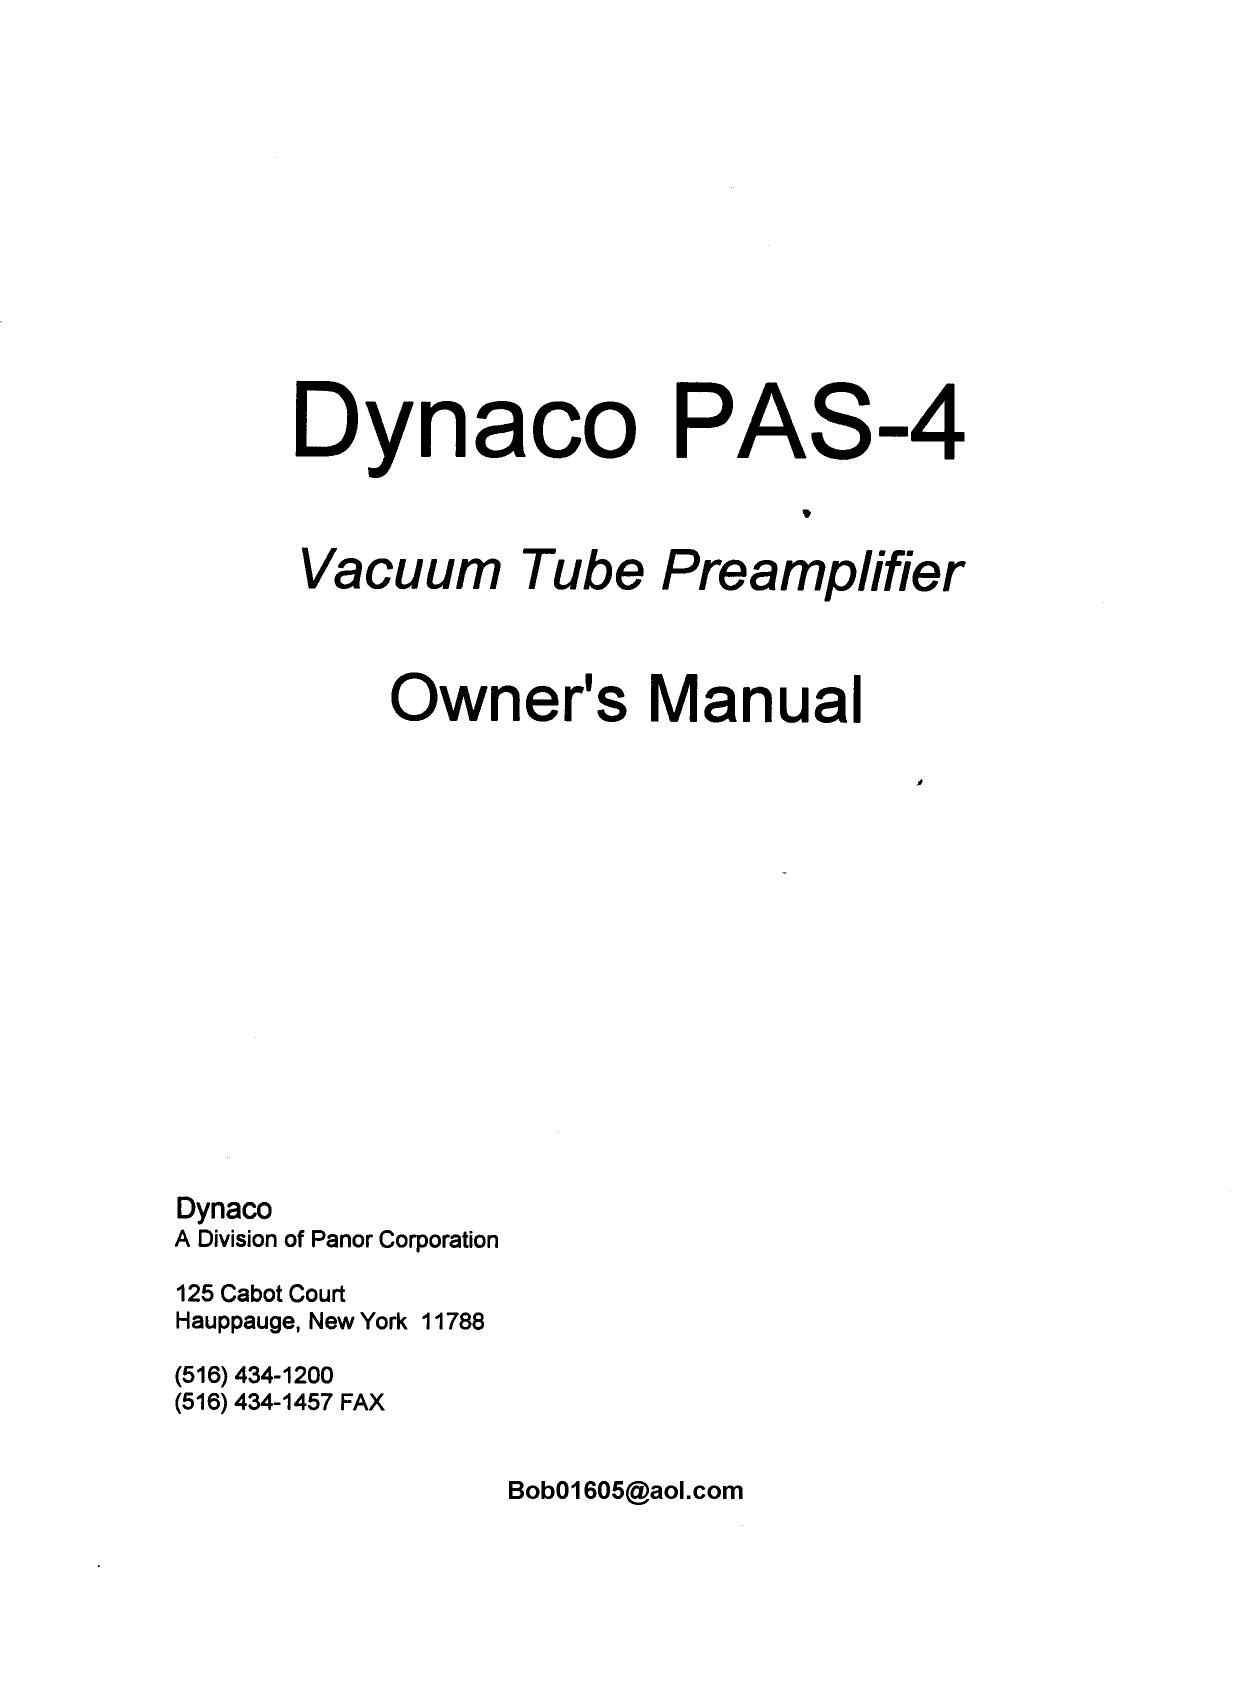 Dynaco PAS 4 Owners Manual